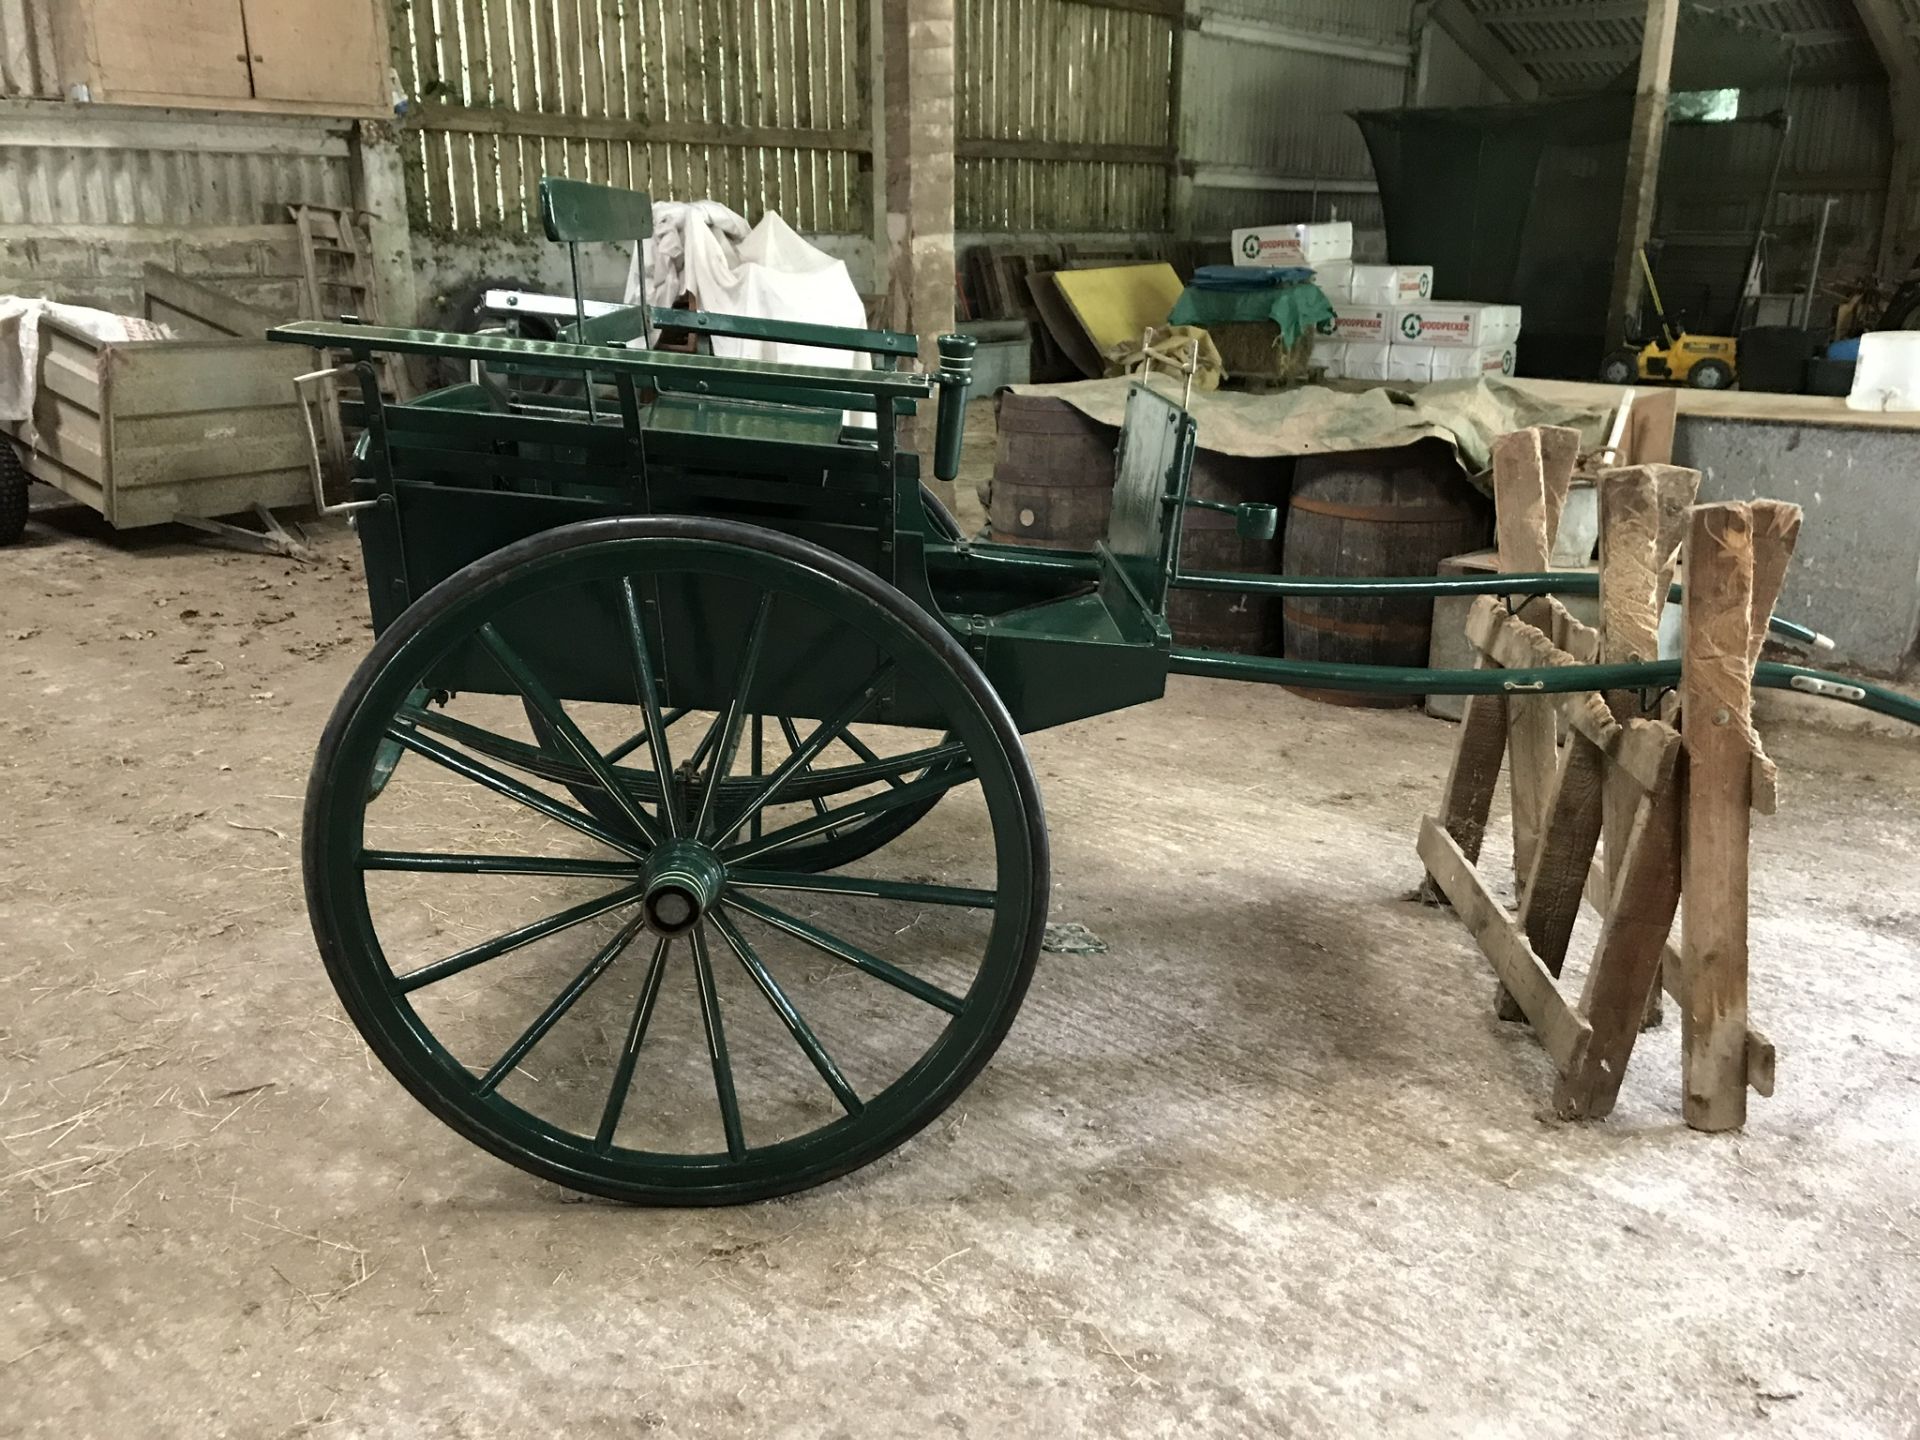 PONY CART to suit size 12hh. The partially slat-sided body is painted dark green with yellow